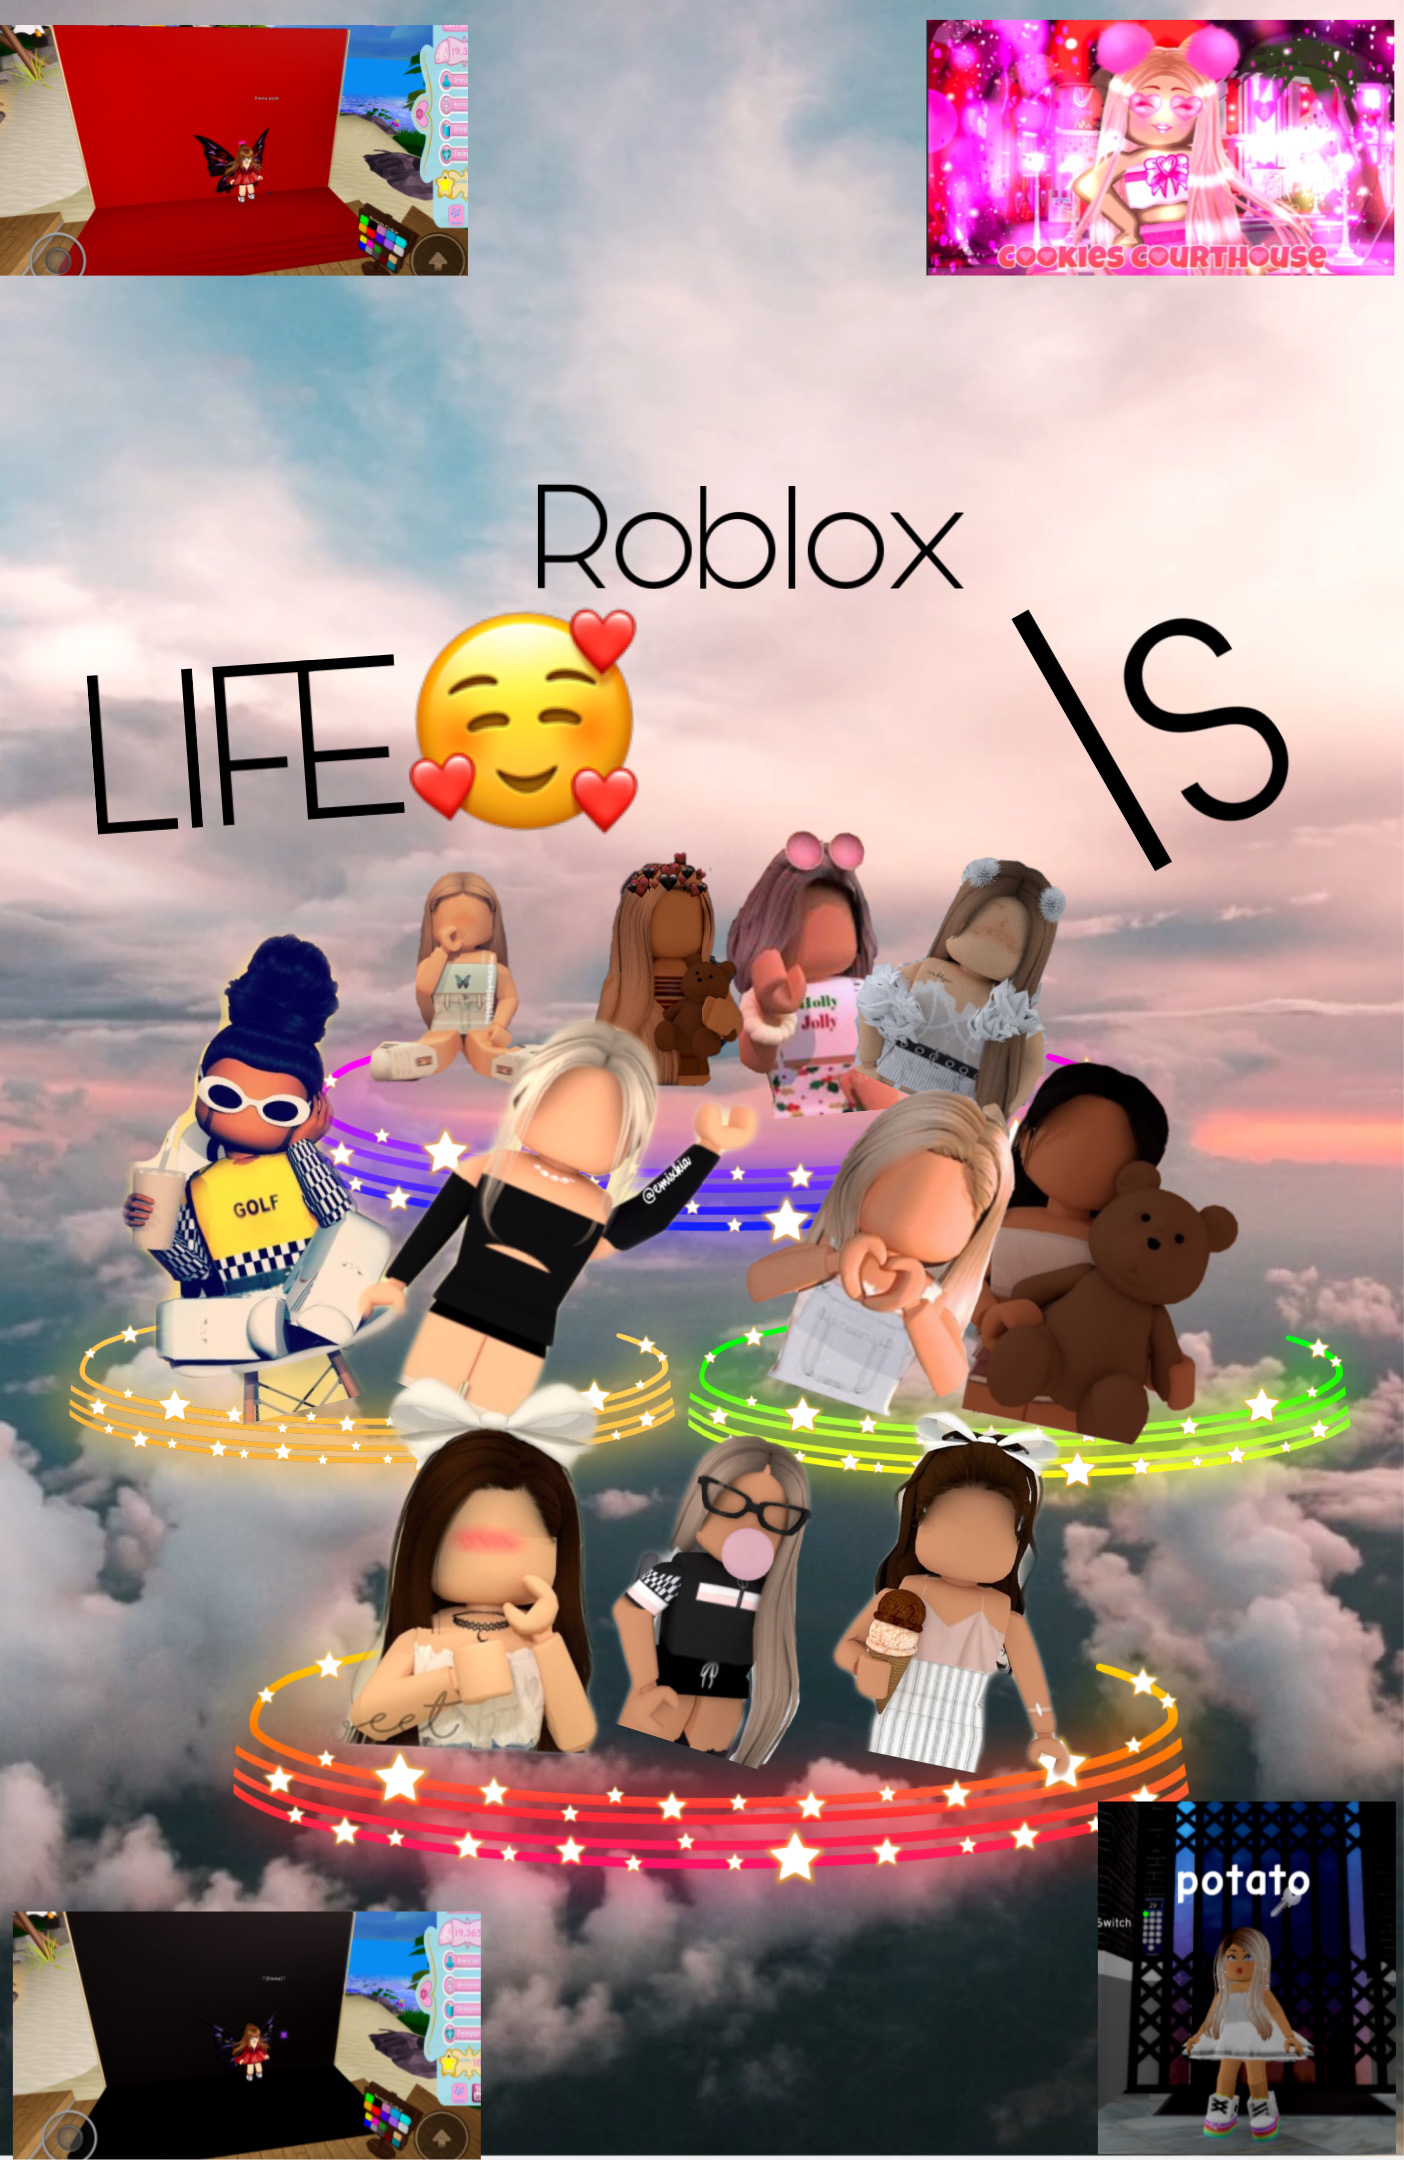 Roblox Image By Ur Local Hottie - roblox instagram posts photos and videos imgistra